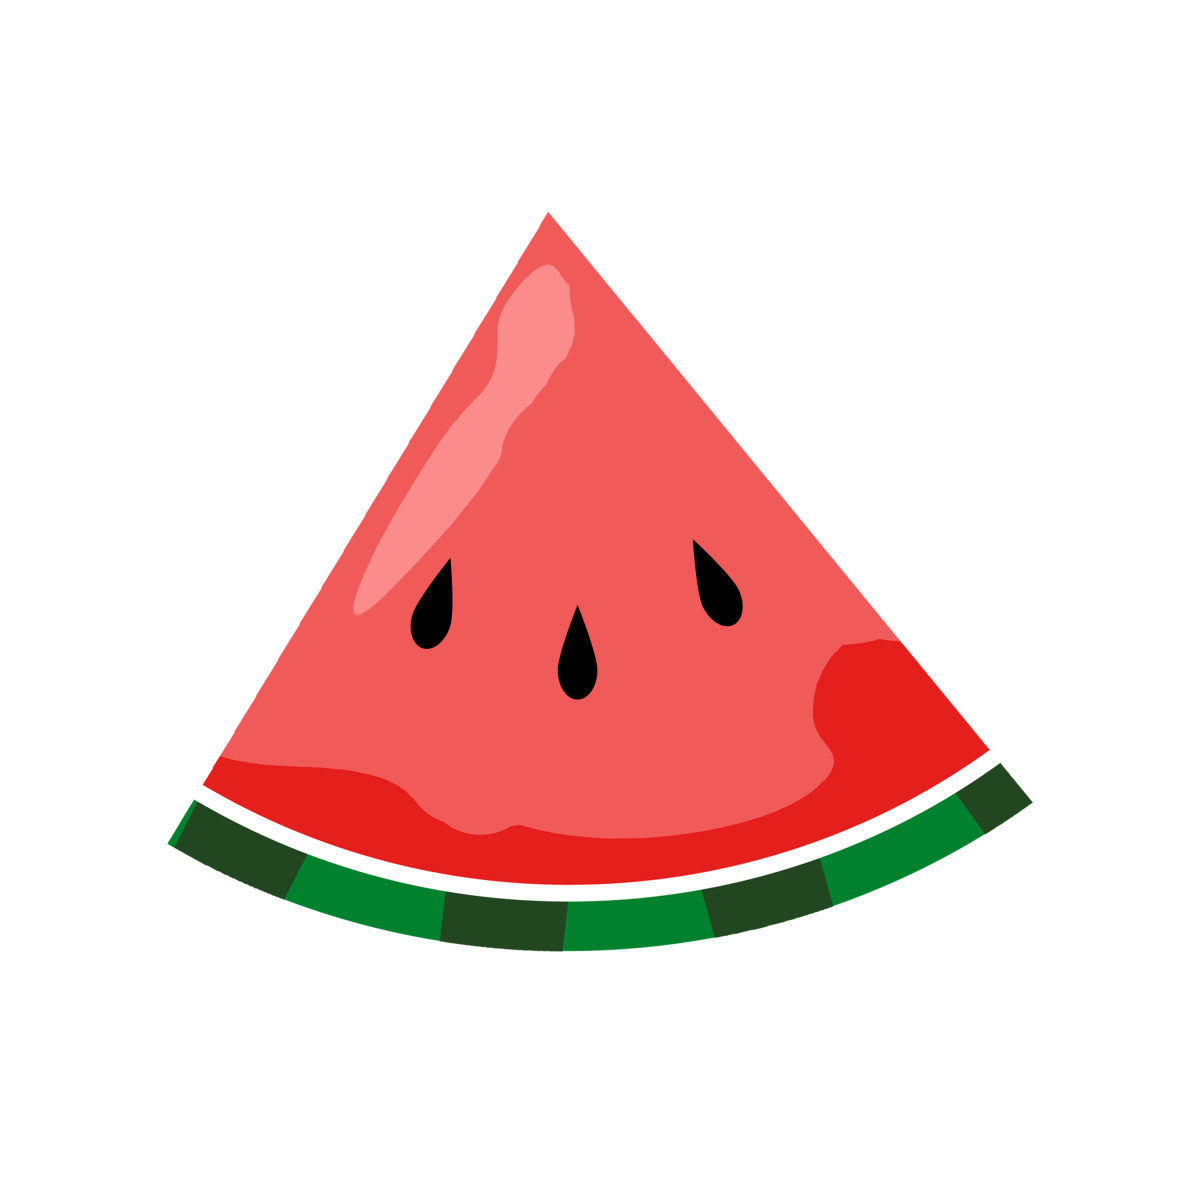 Clip art of a watermelon clipart cliparts for you clipartcow